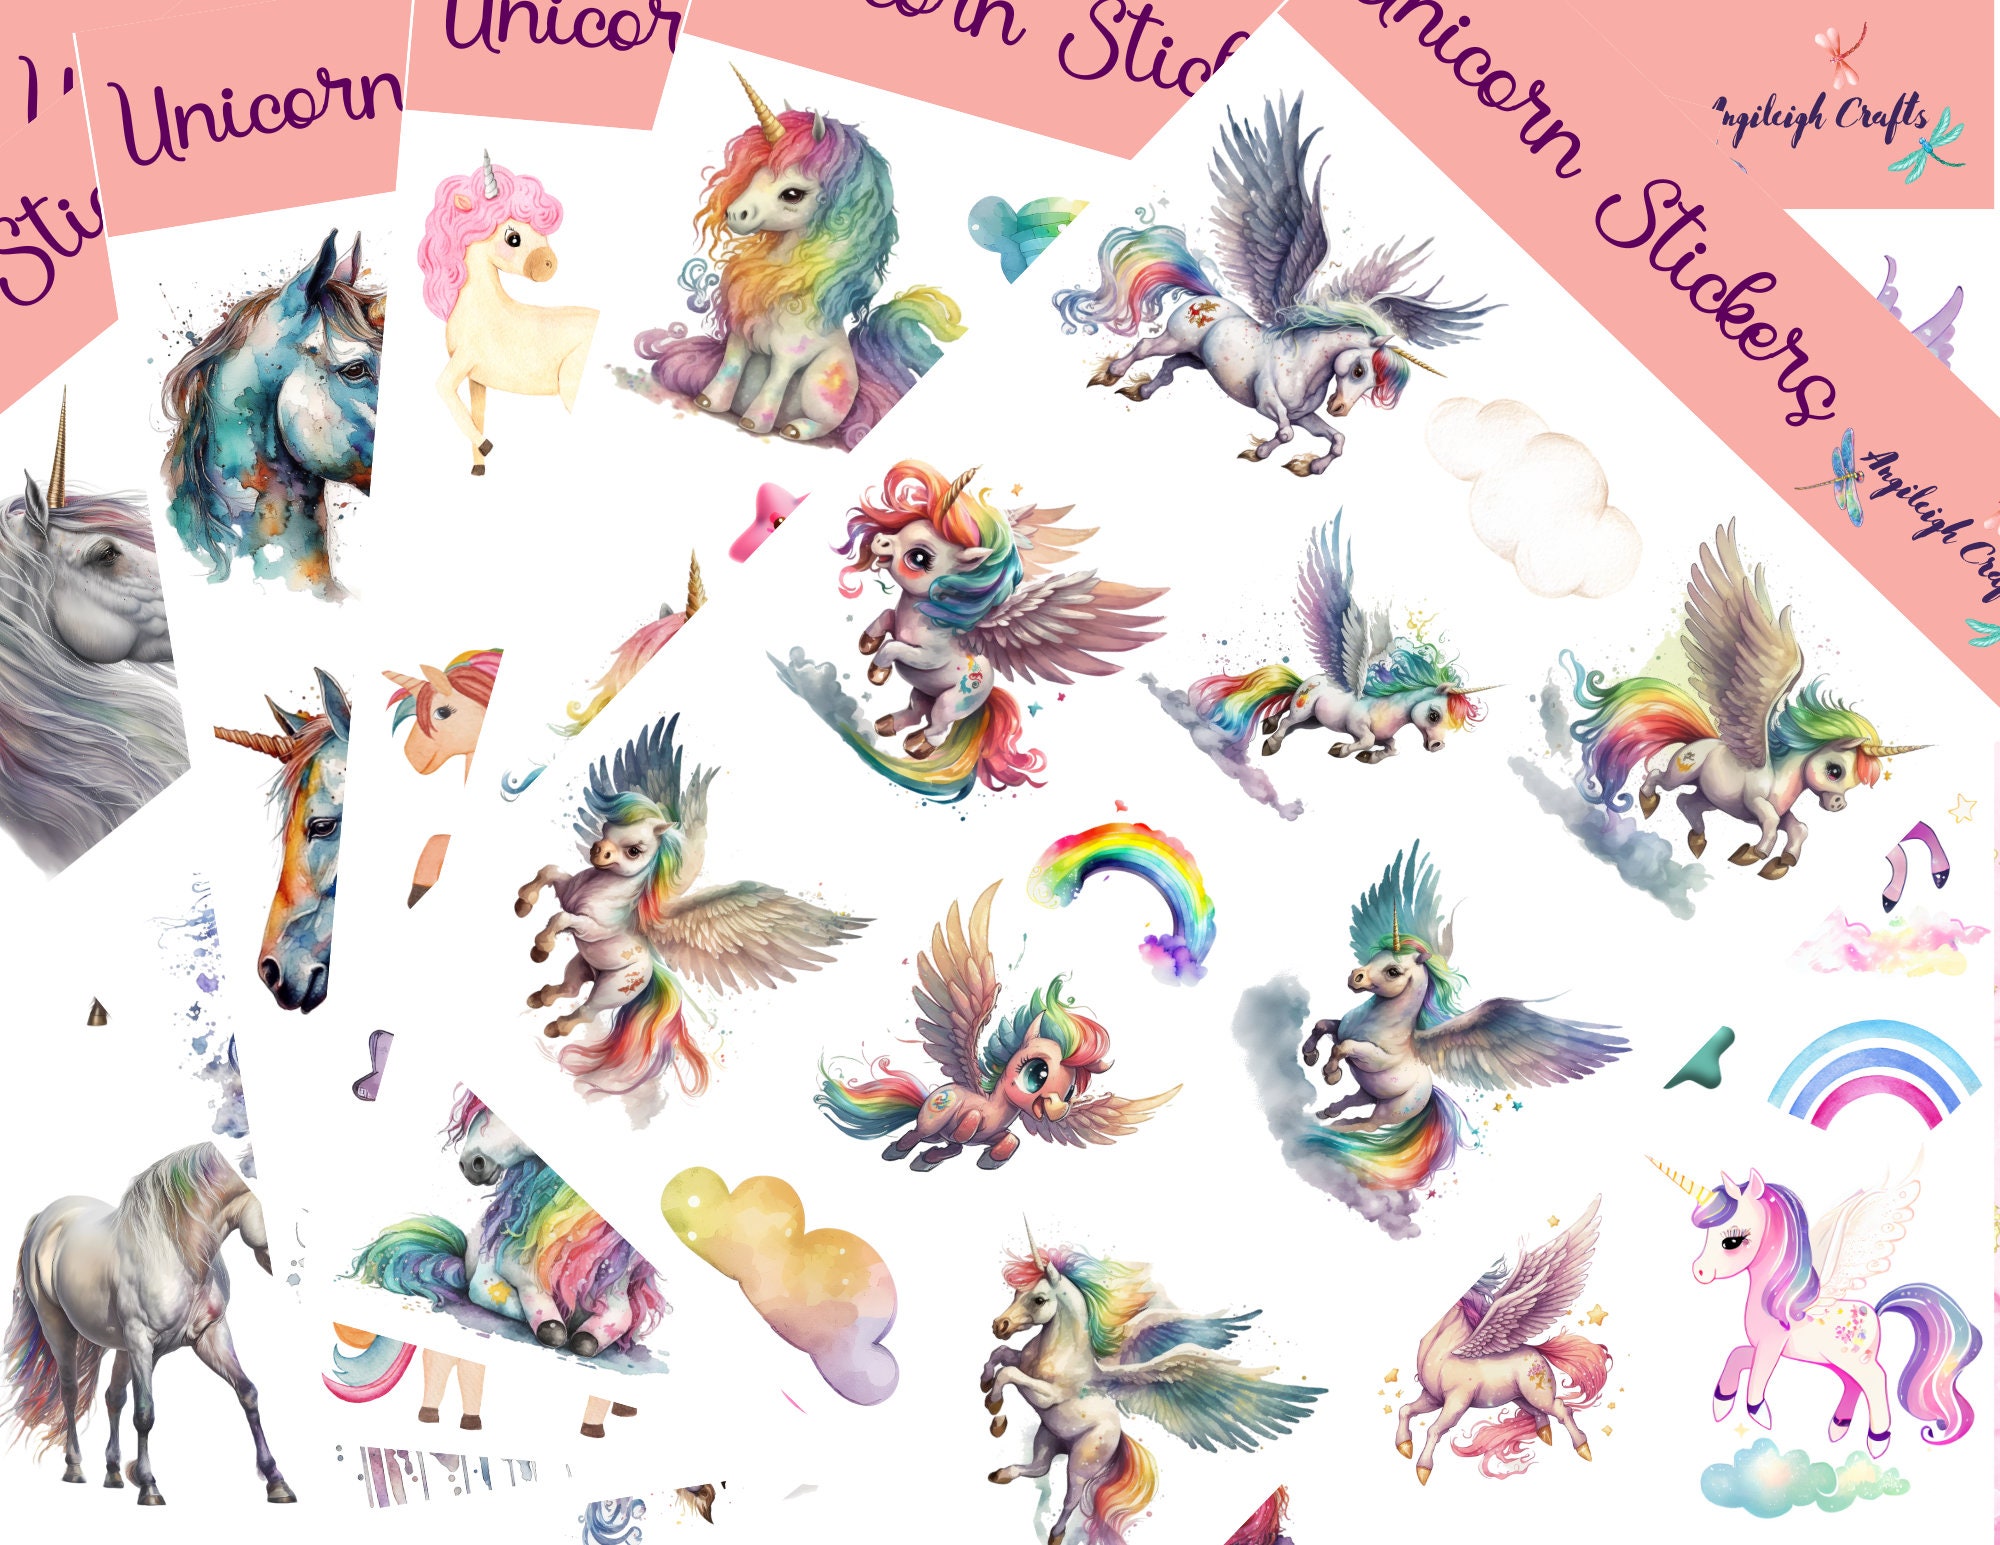 Unicorn Stickers for Girls Kids,50Pcs Reusable Matte Waterproof Vinyl  Unicorn Sticker for Water Bottles,Colorful Aesthetic Rainbow Stickers for